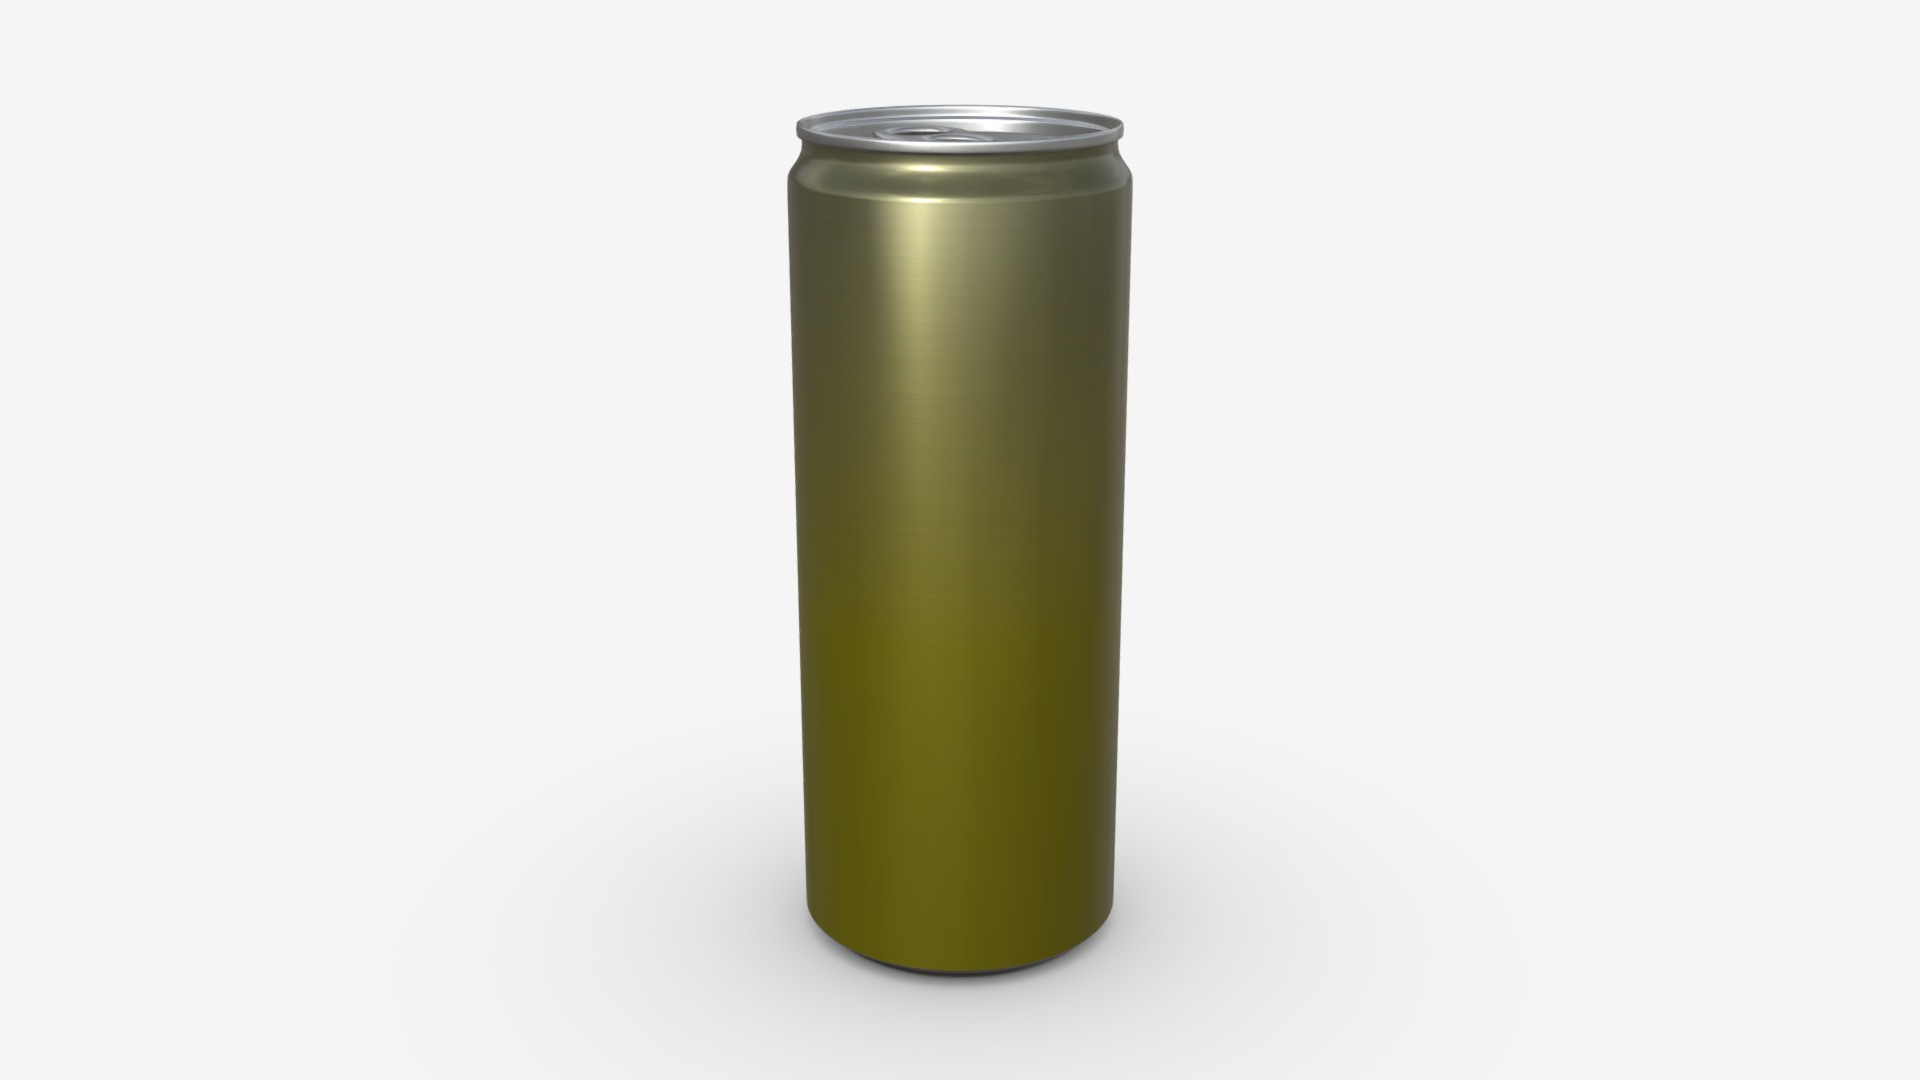 3D model Slim beverage can 250ml 8.45 oz - This is a 3D model of the Slim beverage can 250ml 8.45 oz. The 3D model is about a green cylindrical object.